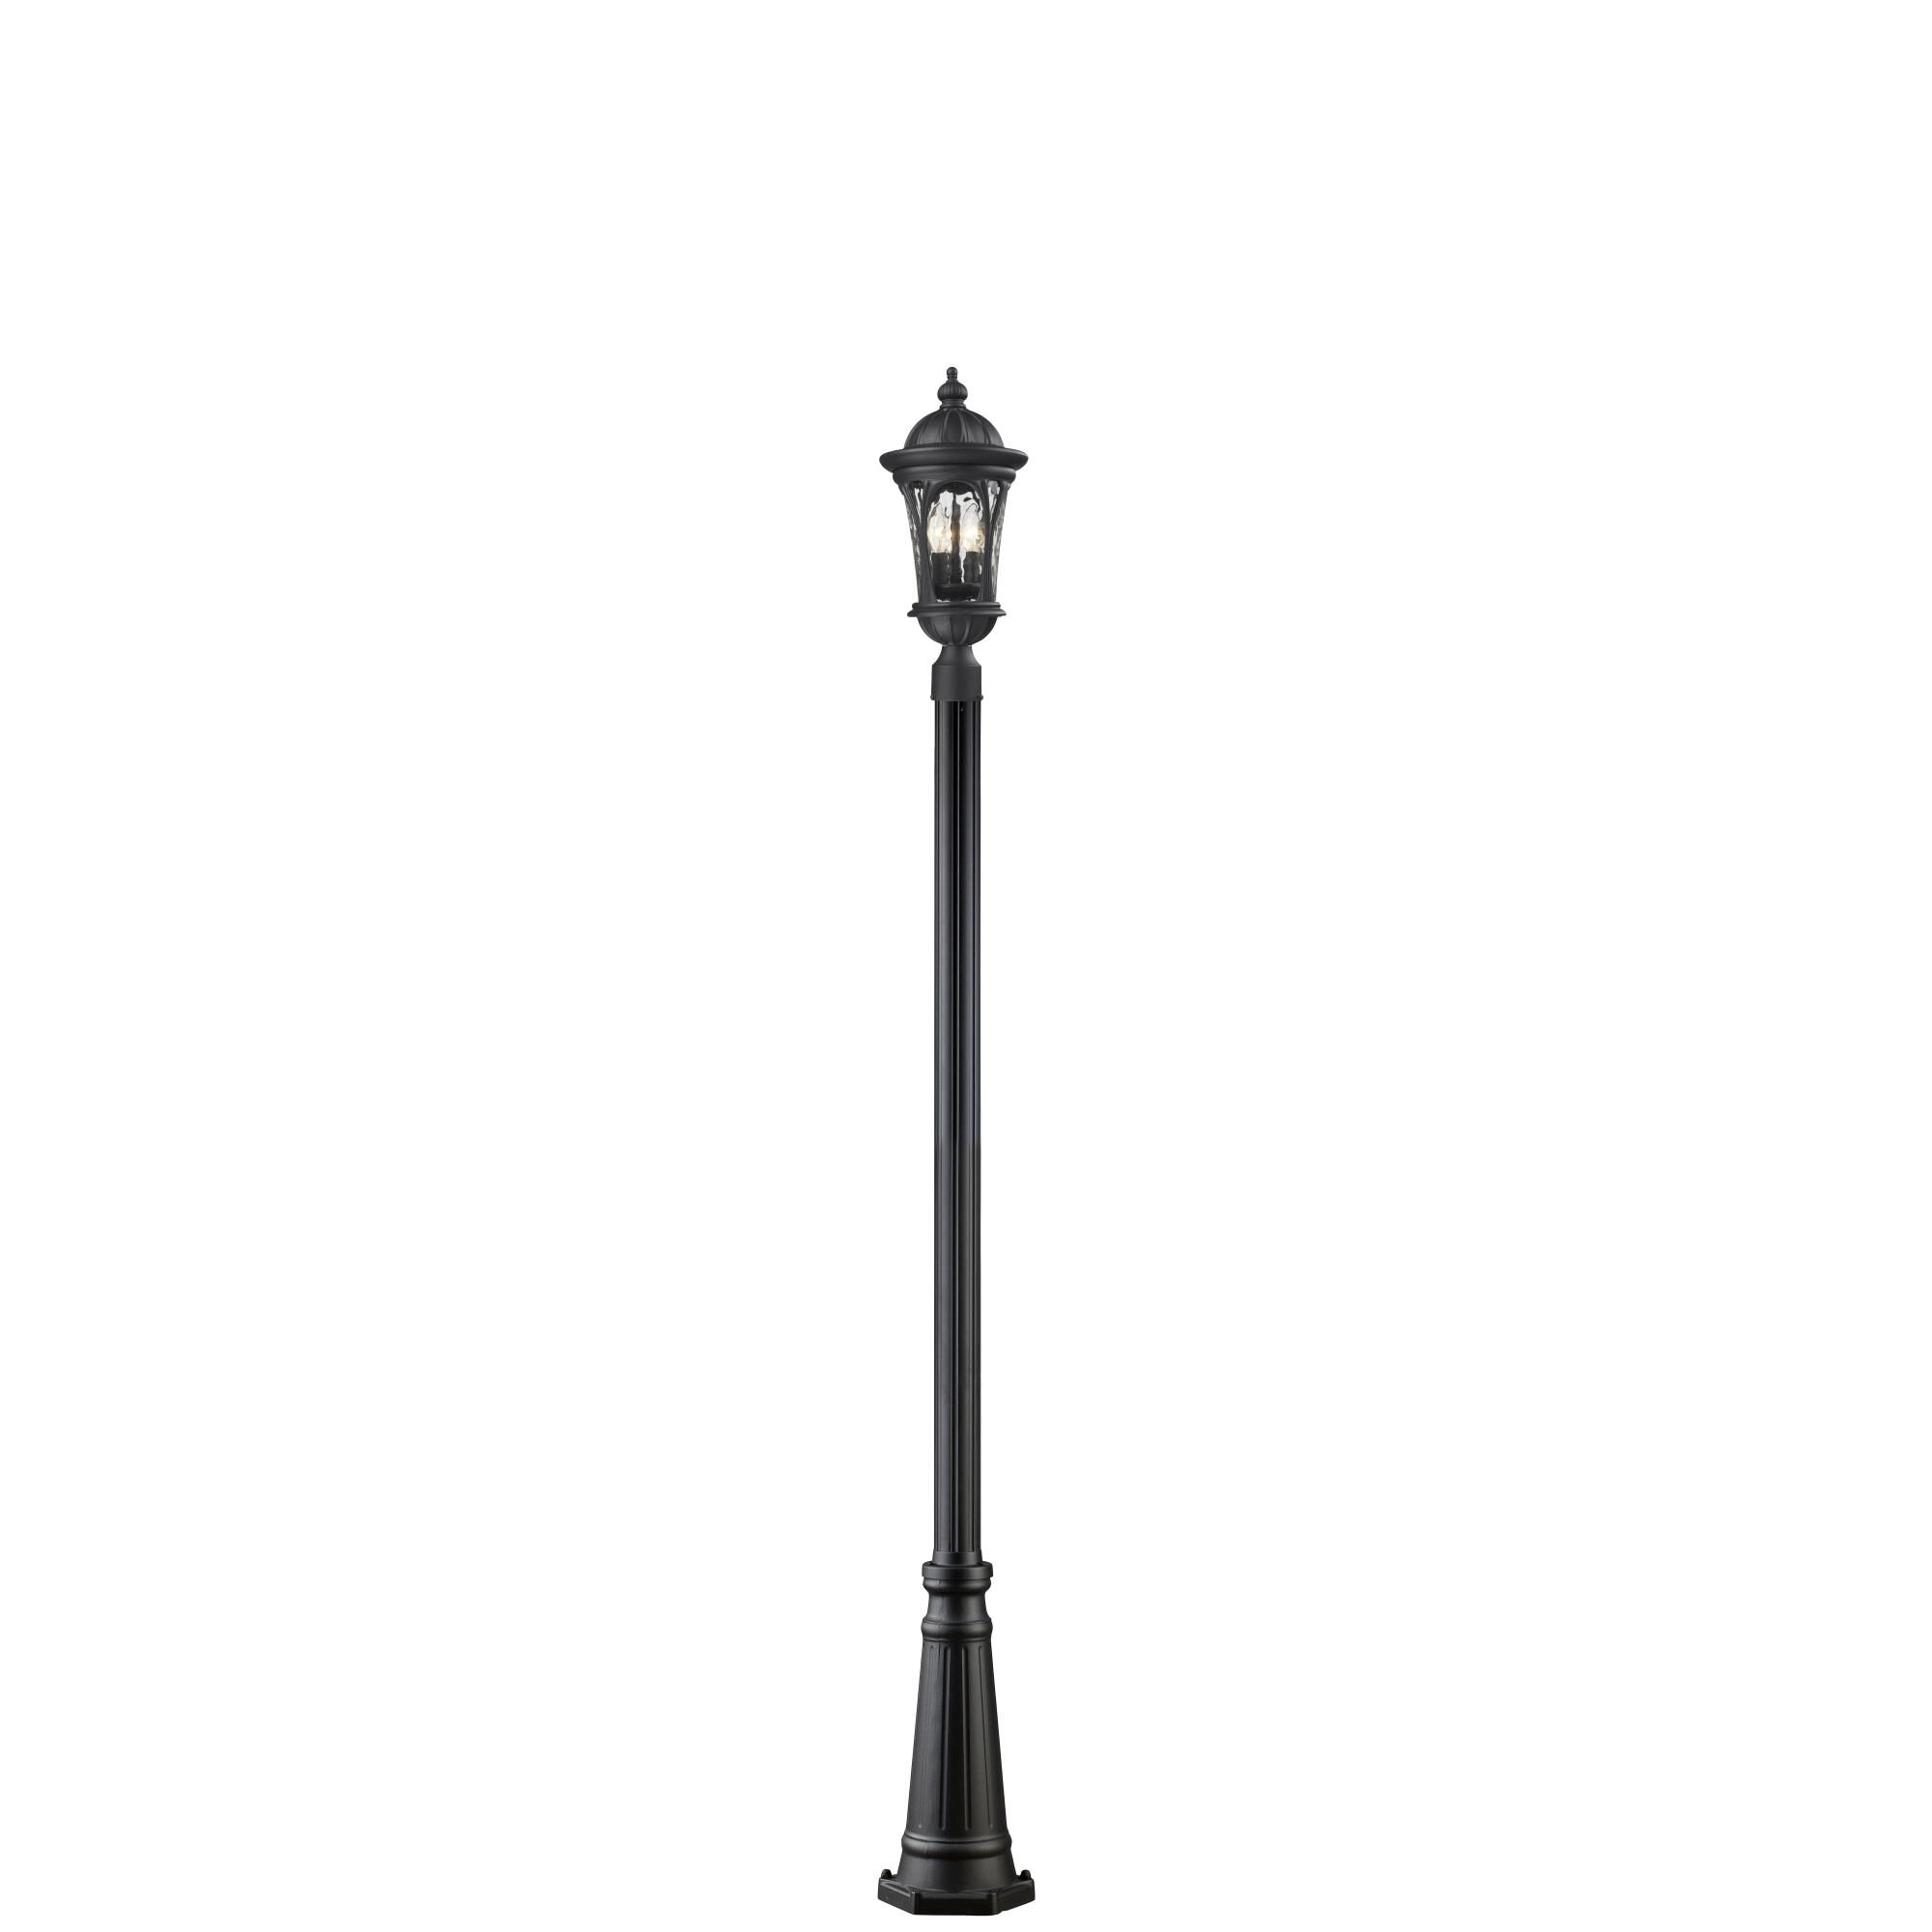 Photos - Floodlight / Garden Lamps Z-Lite Doma 113 Inch Tall 3 Light Outdoor Post Lamp Doma - 543PHM-519P-BK